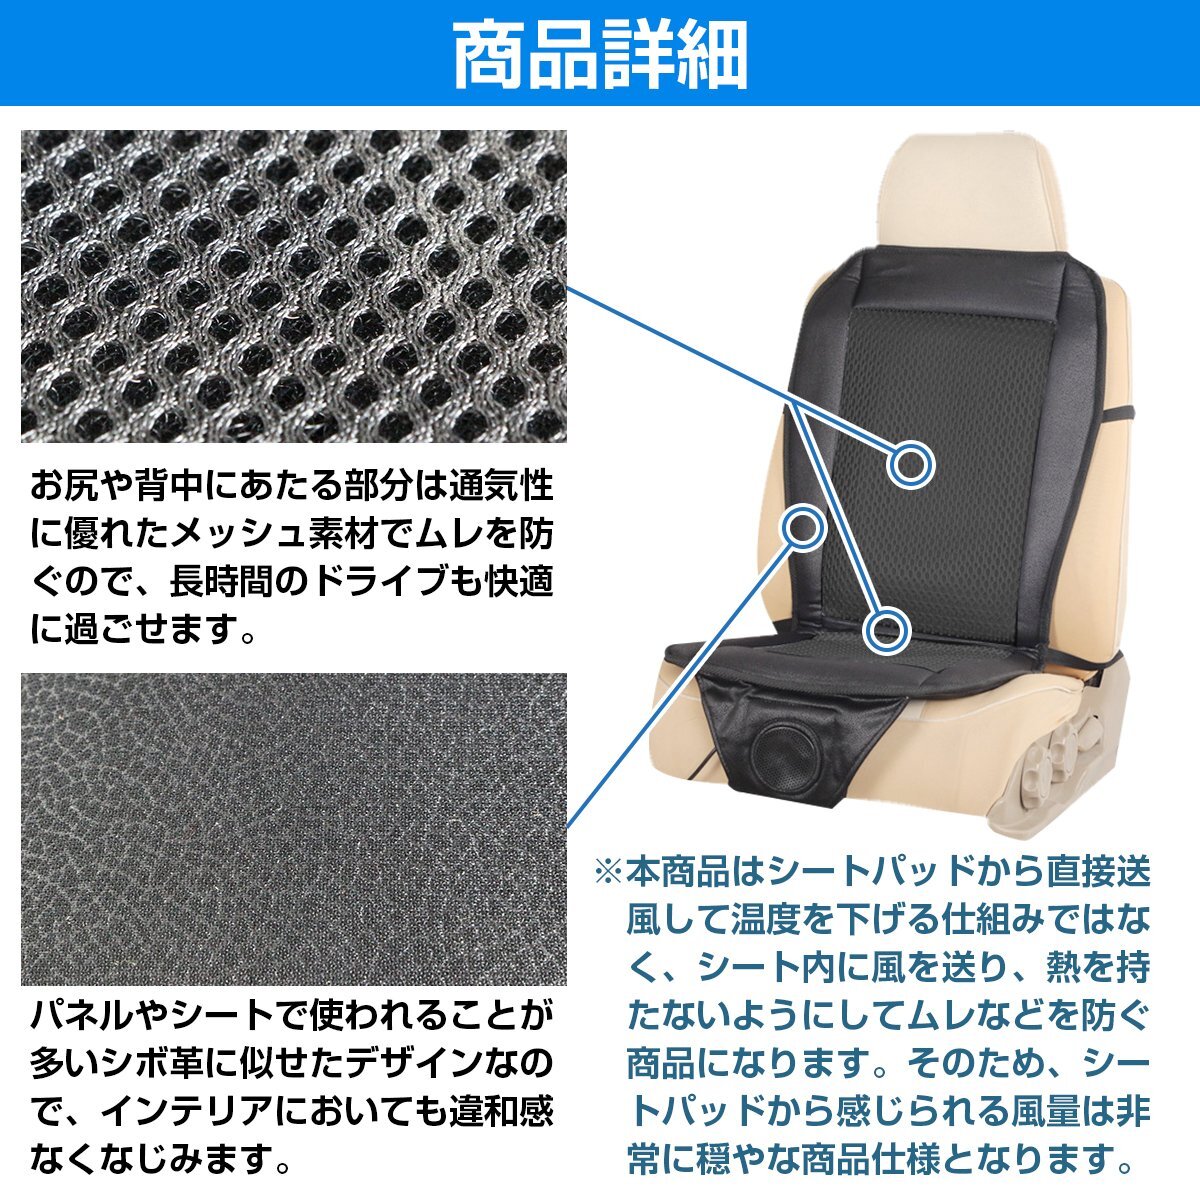  summer also comfortable . in car! cool car seat car 24V cool seat sending manner fan car seat air cool seat electric fan cool e Ahkah seat 